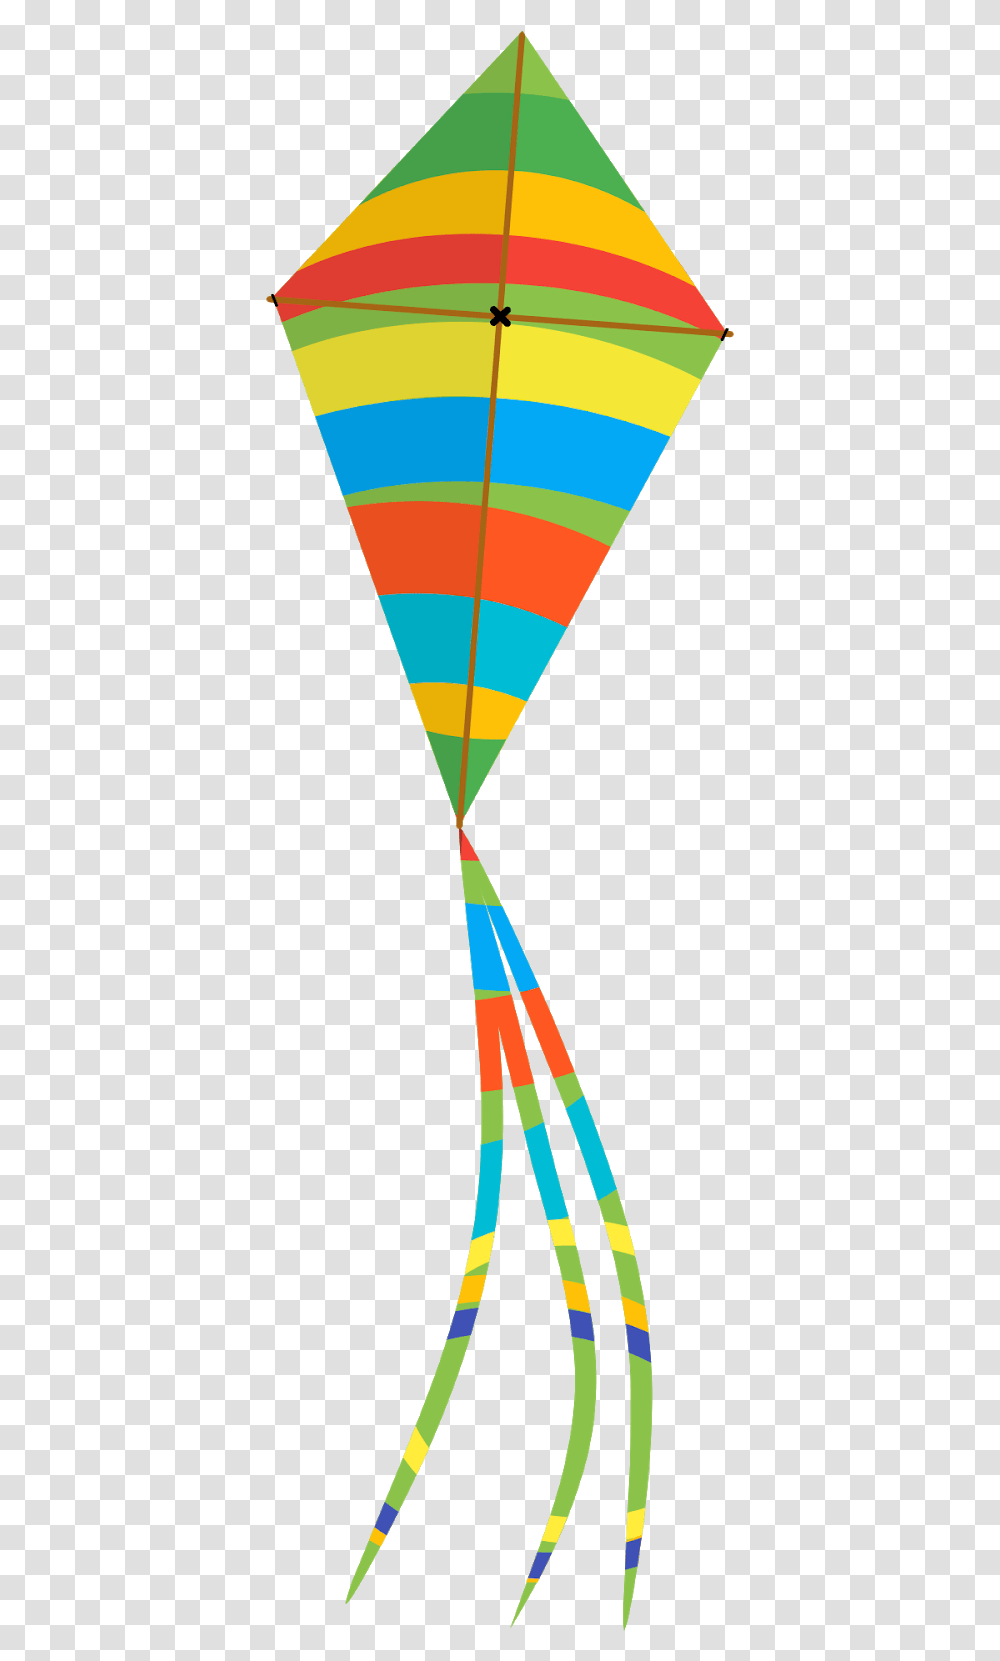 Kite Colorful Toy String Blue Air Sky Wind Graphic Design, Balloon, Cone, Triangle Transparent Png